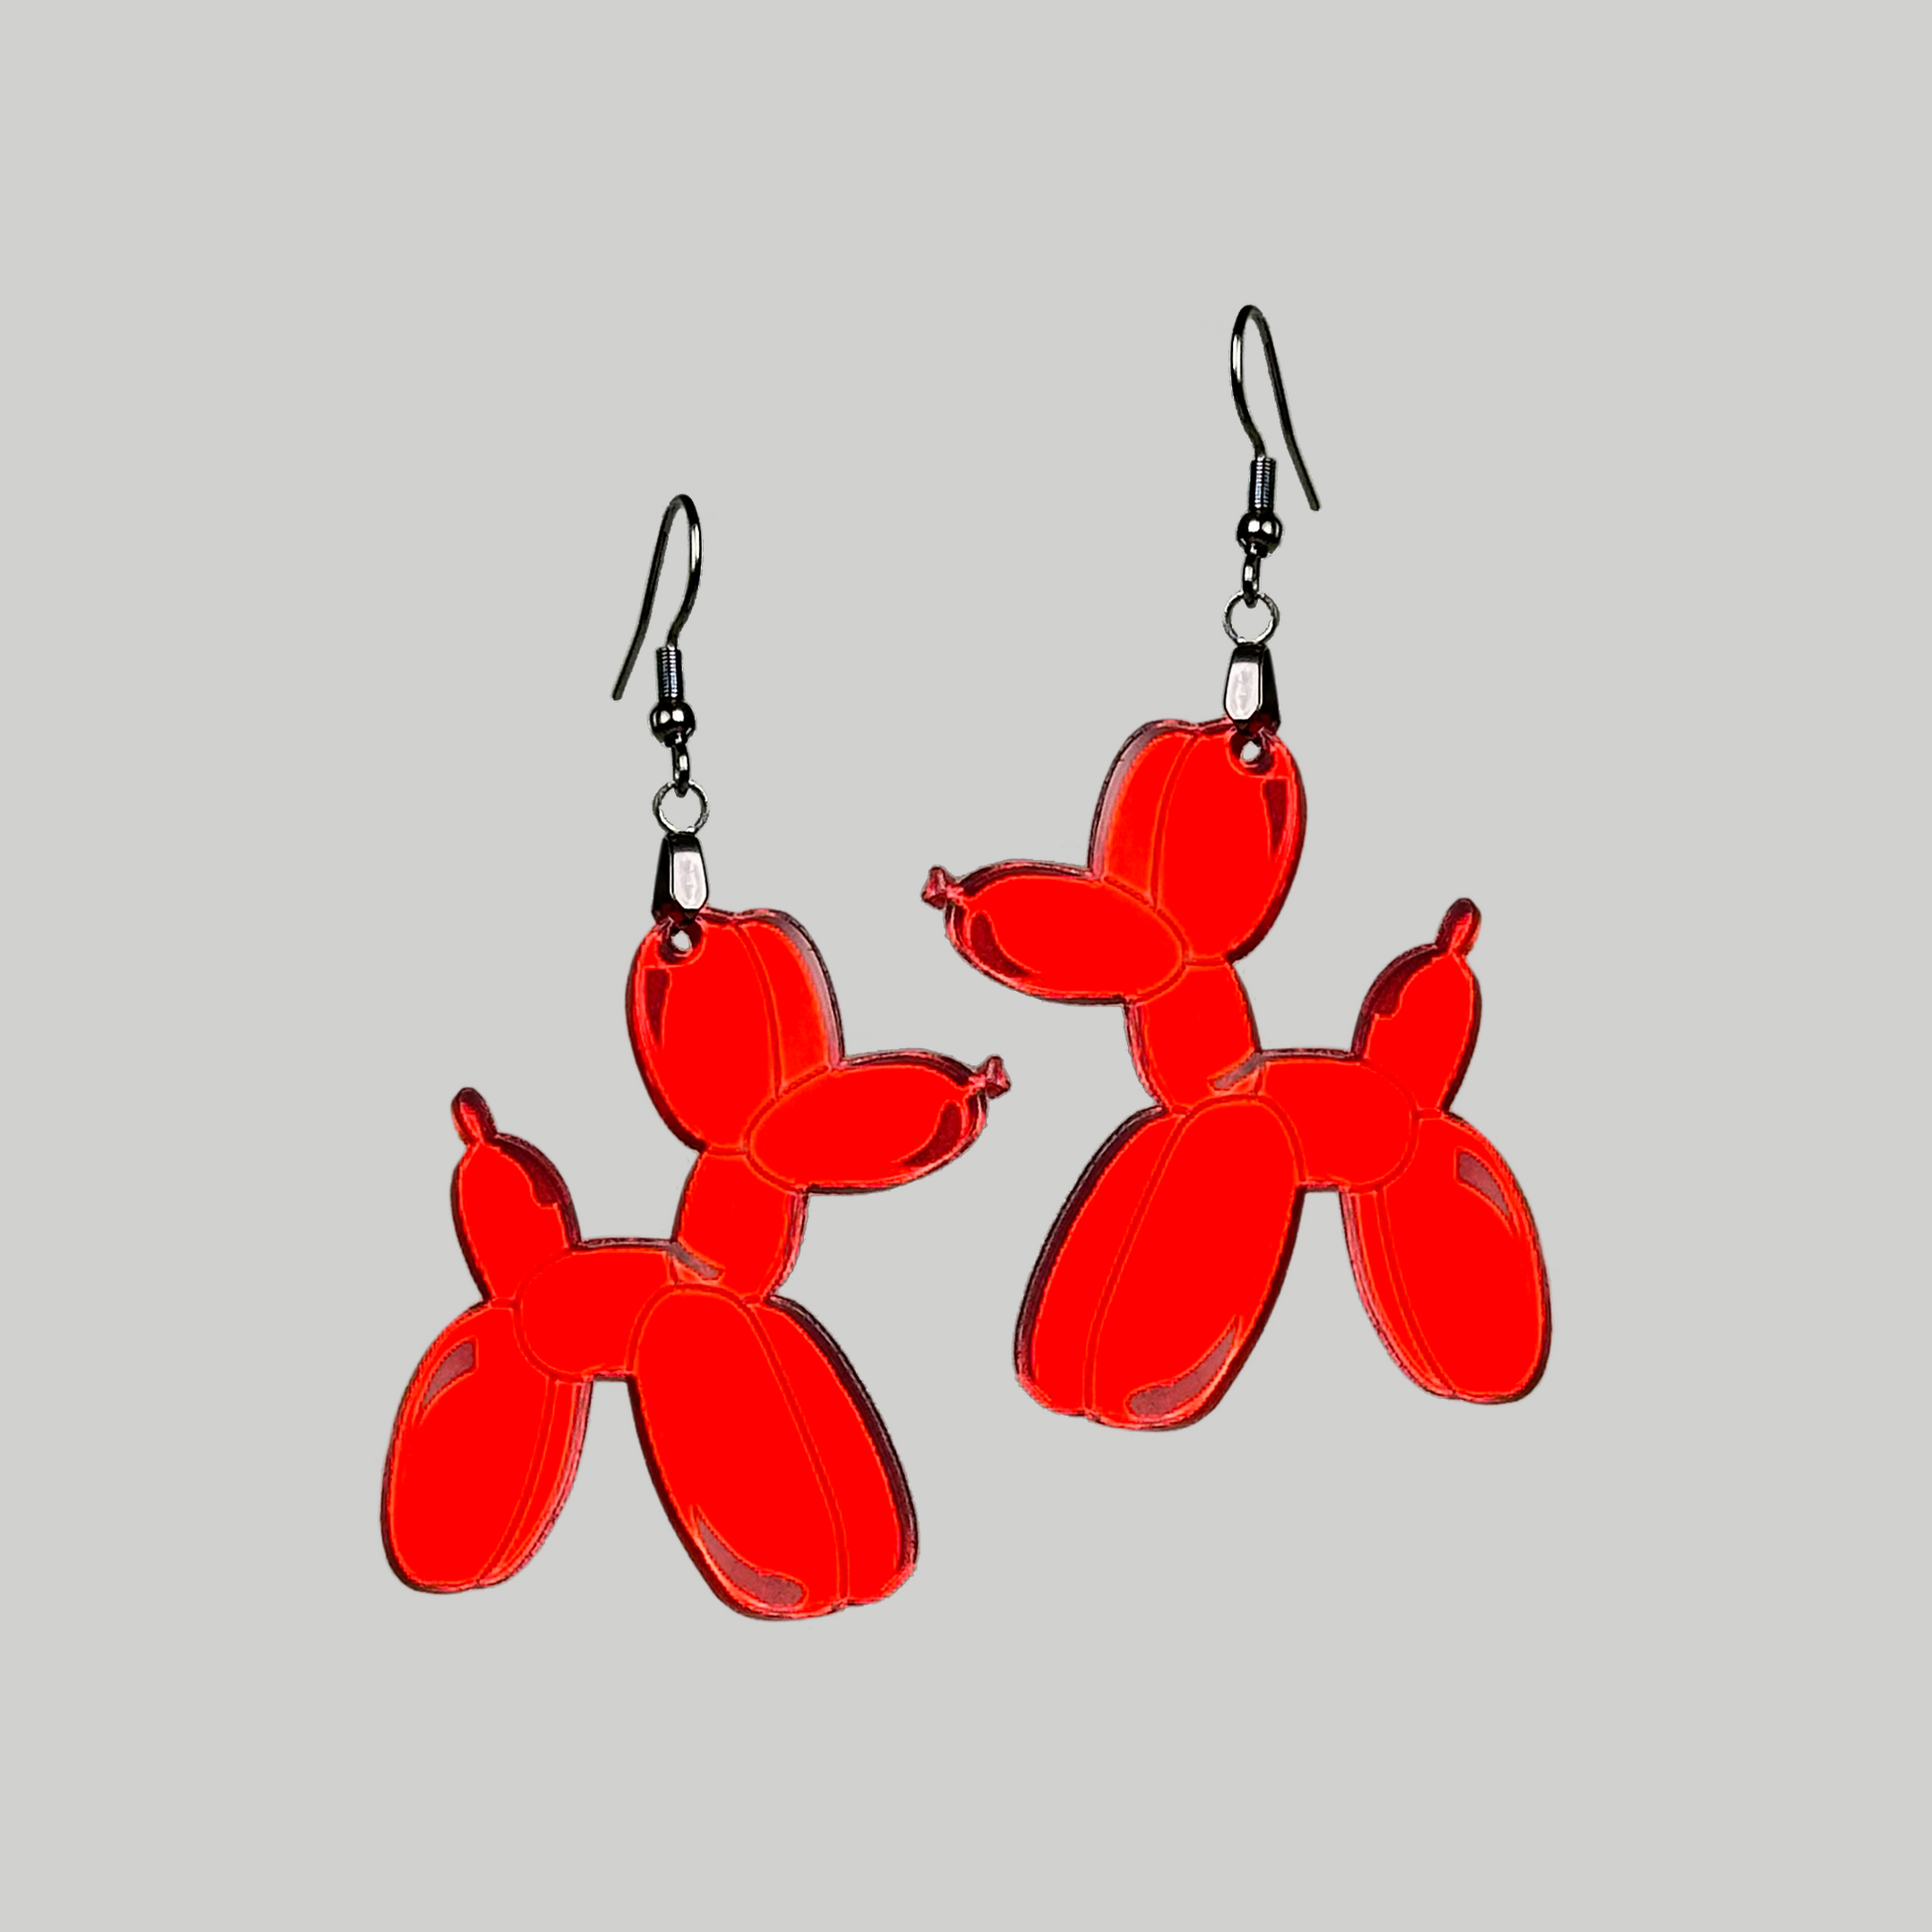 Earrings featuring a balloon animal-shaped dog, a playful and charming accessory to showcase your love for whimsical design.